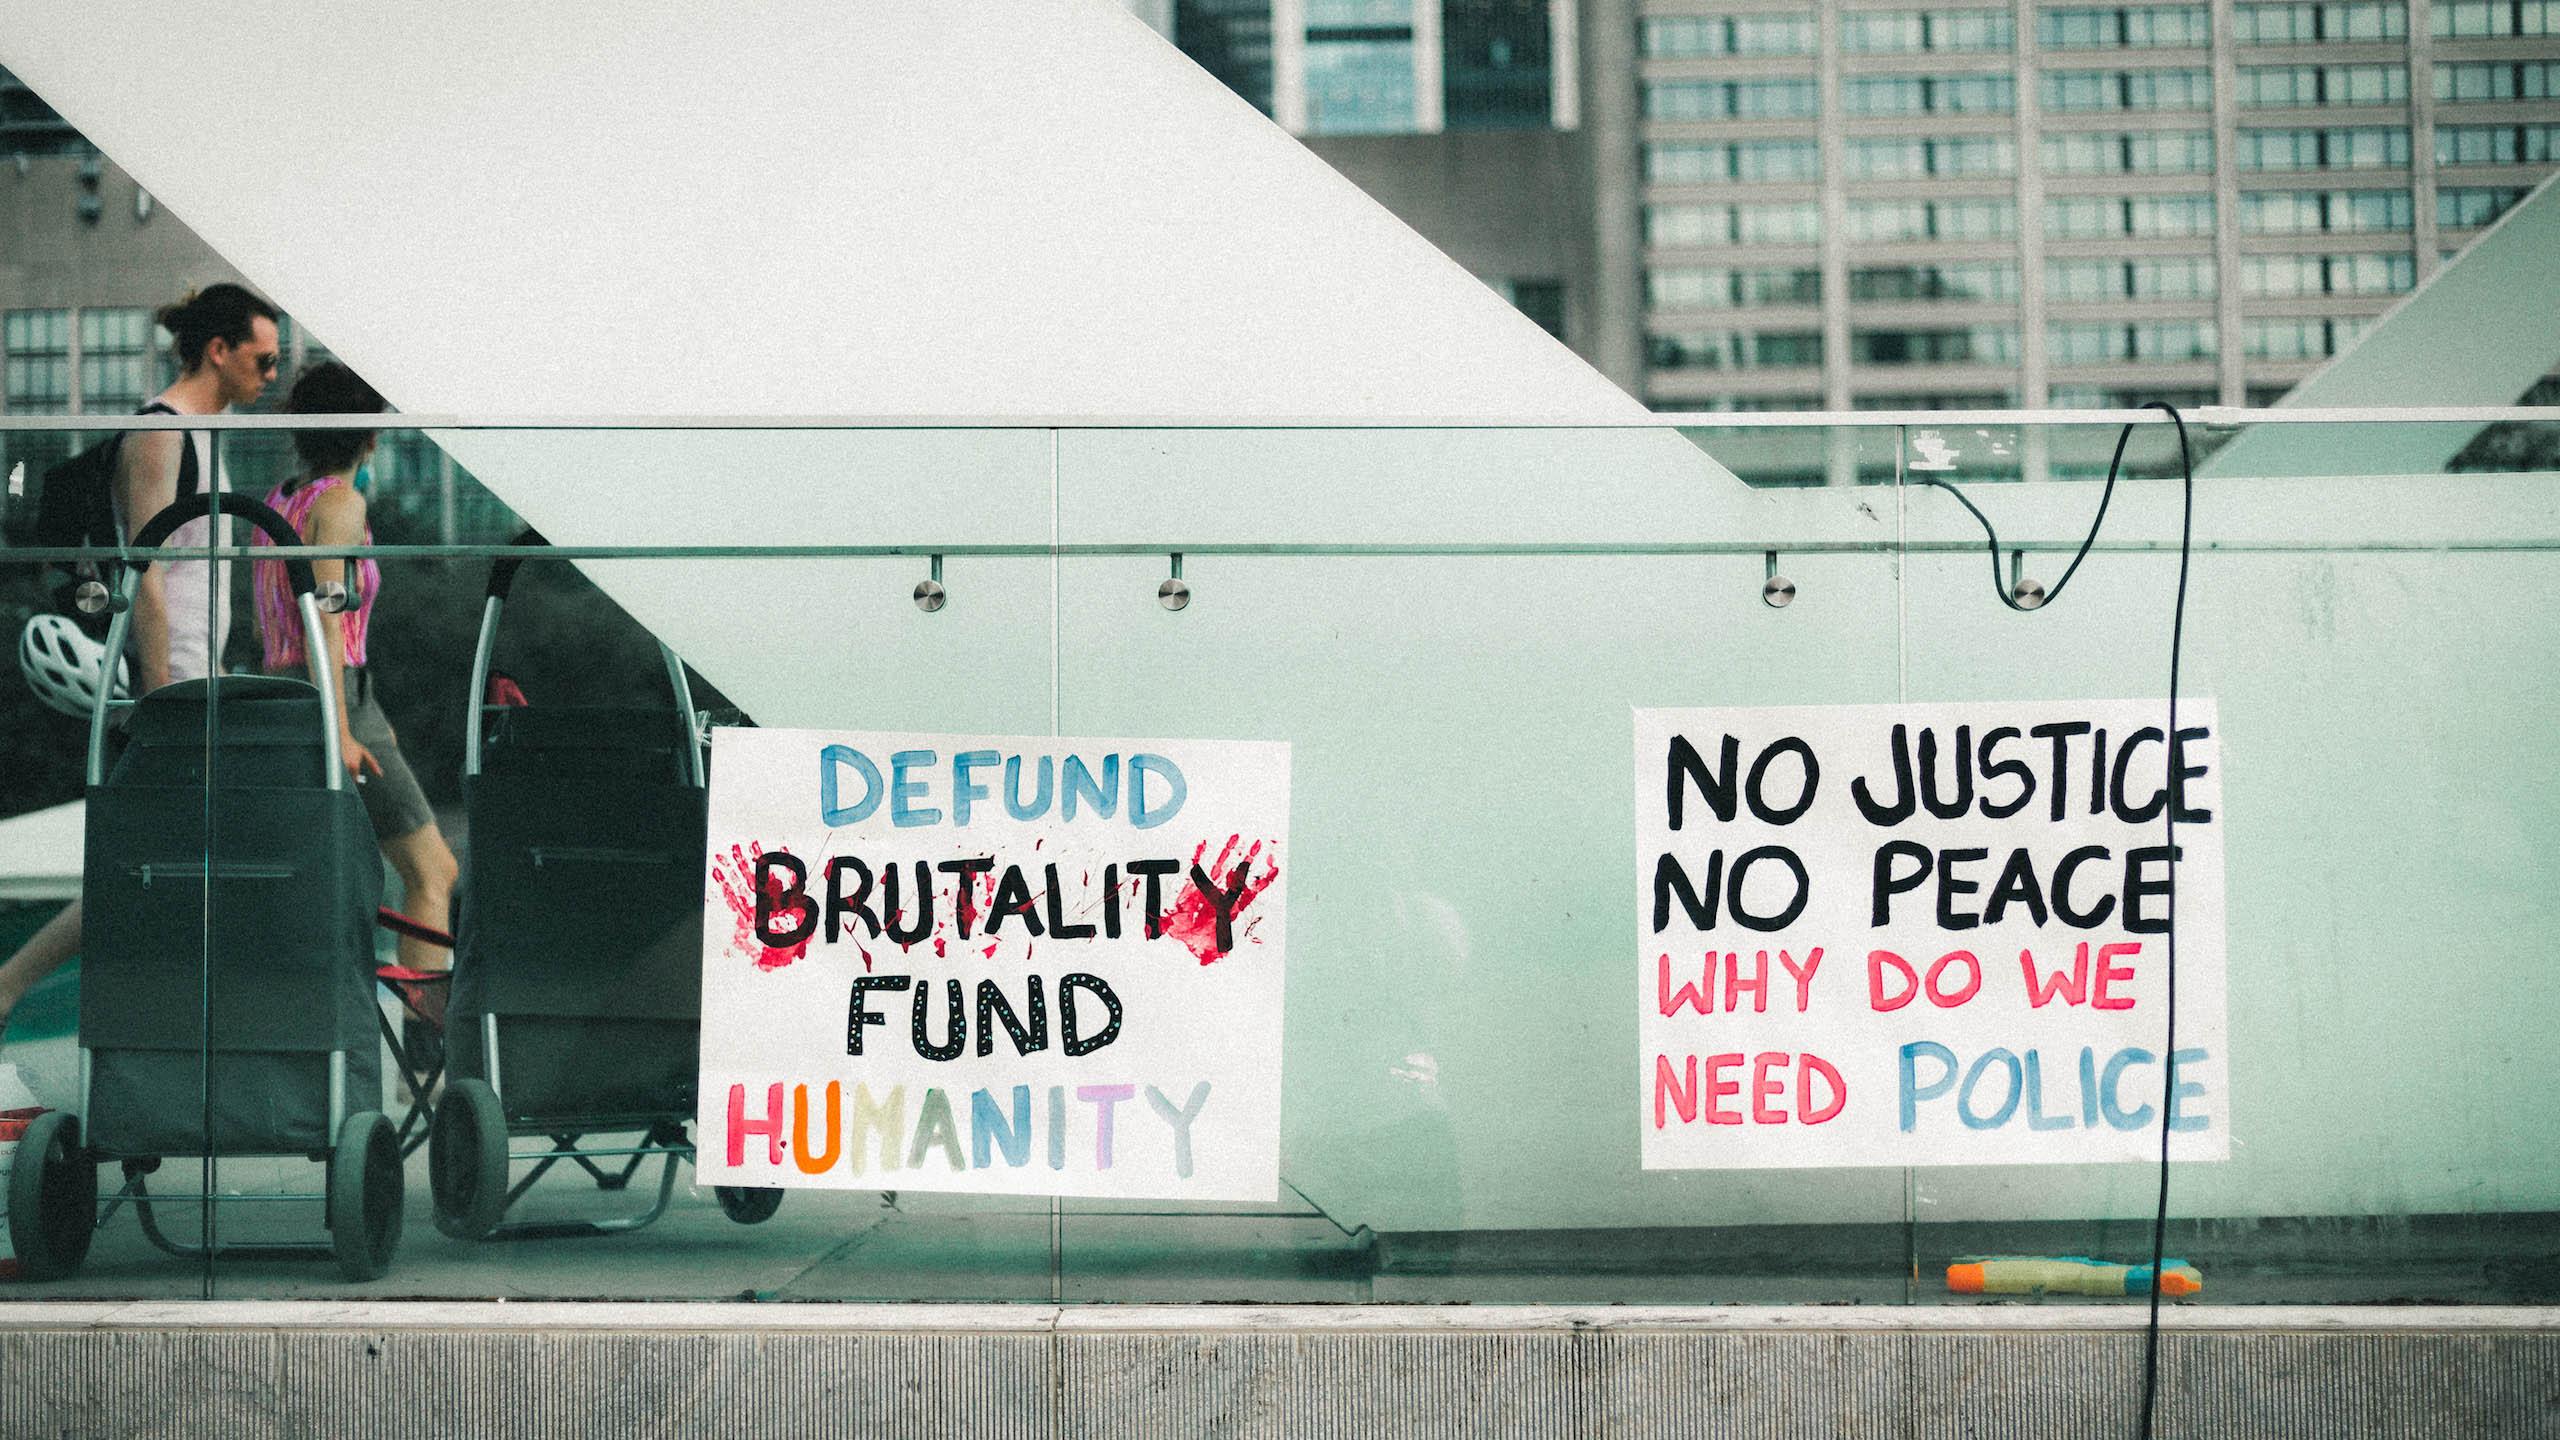 One sign reads: defund brutality, fund humanity; another sign reads no justice, no peace, why do we need police